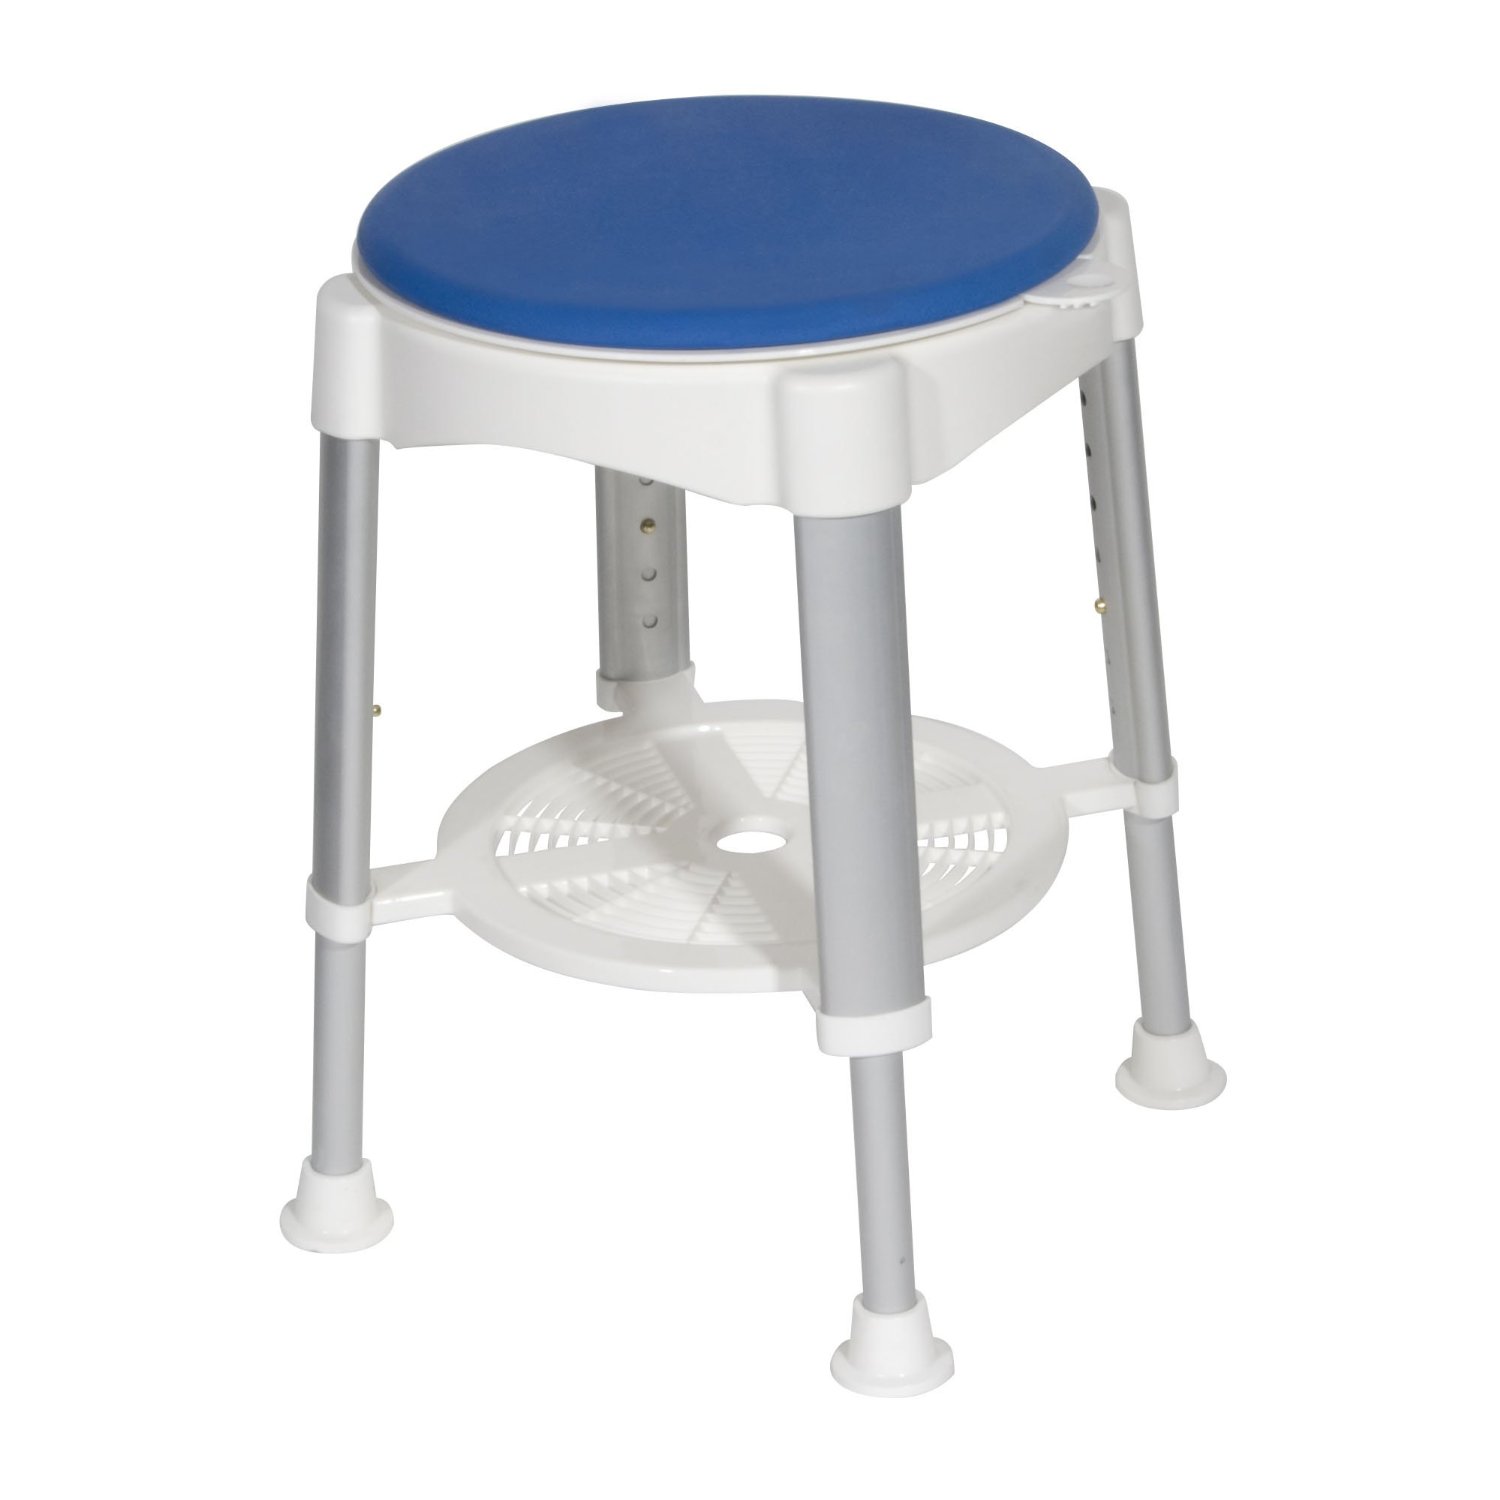 Medical Bath Stool With Padded Rotating Seat